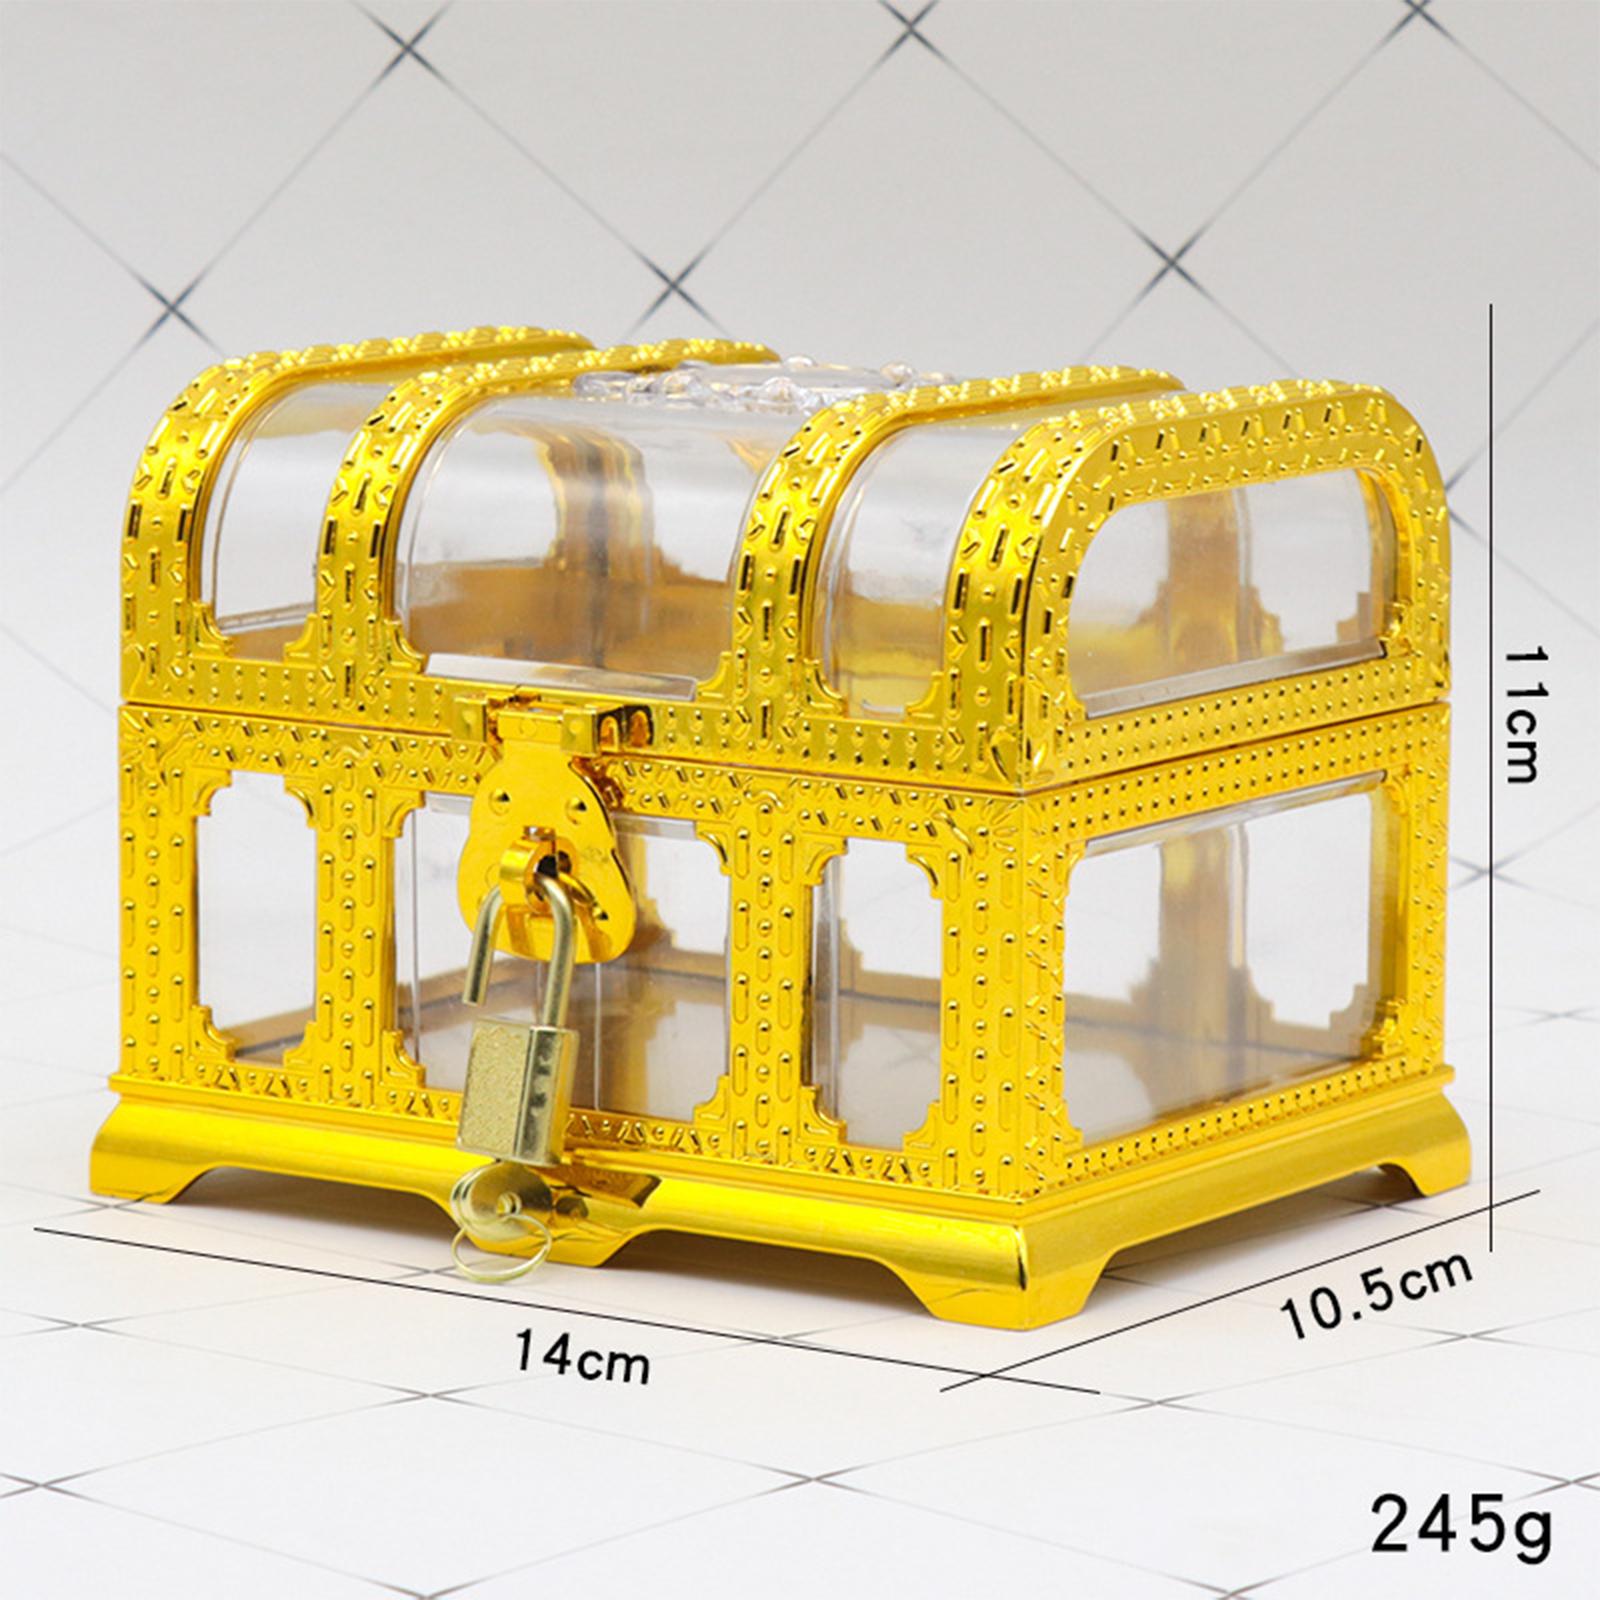 Pirate Treasure Chest for Kids Toy, Decorative Transparent Gold